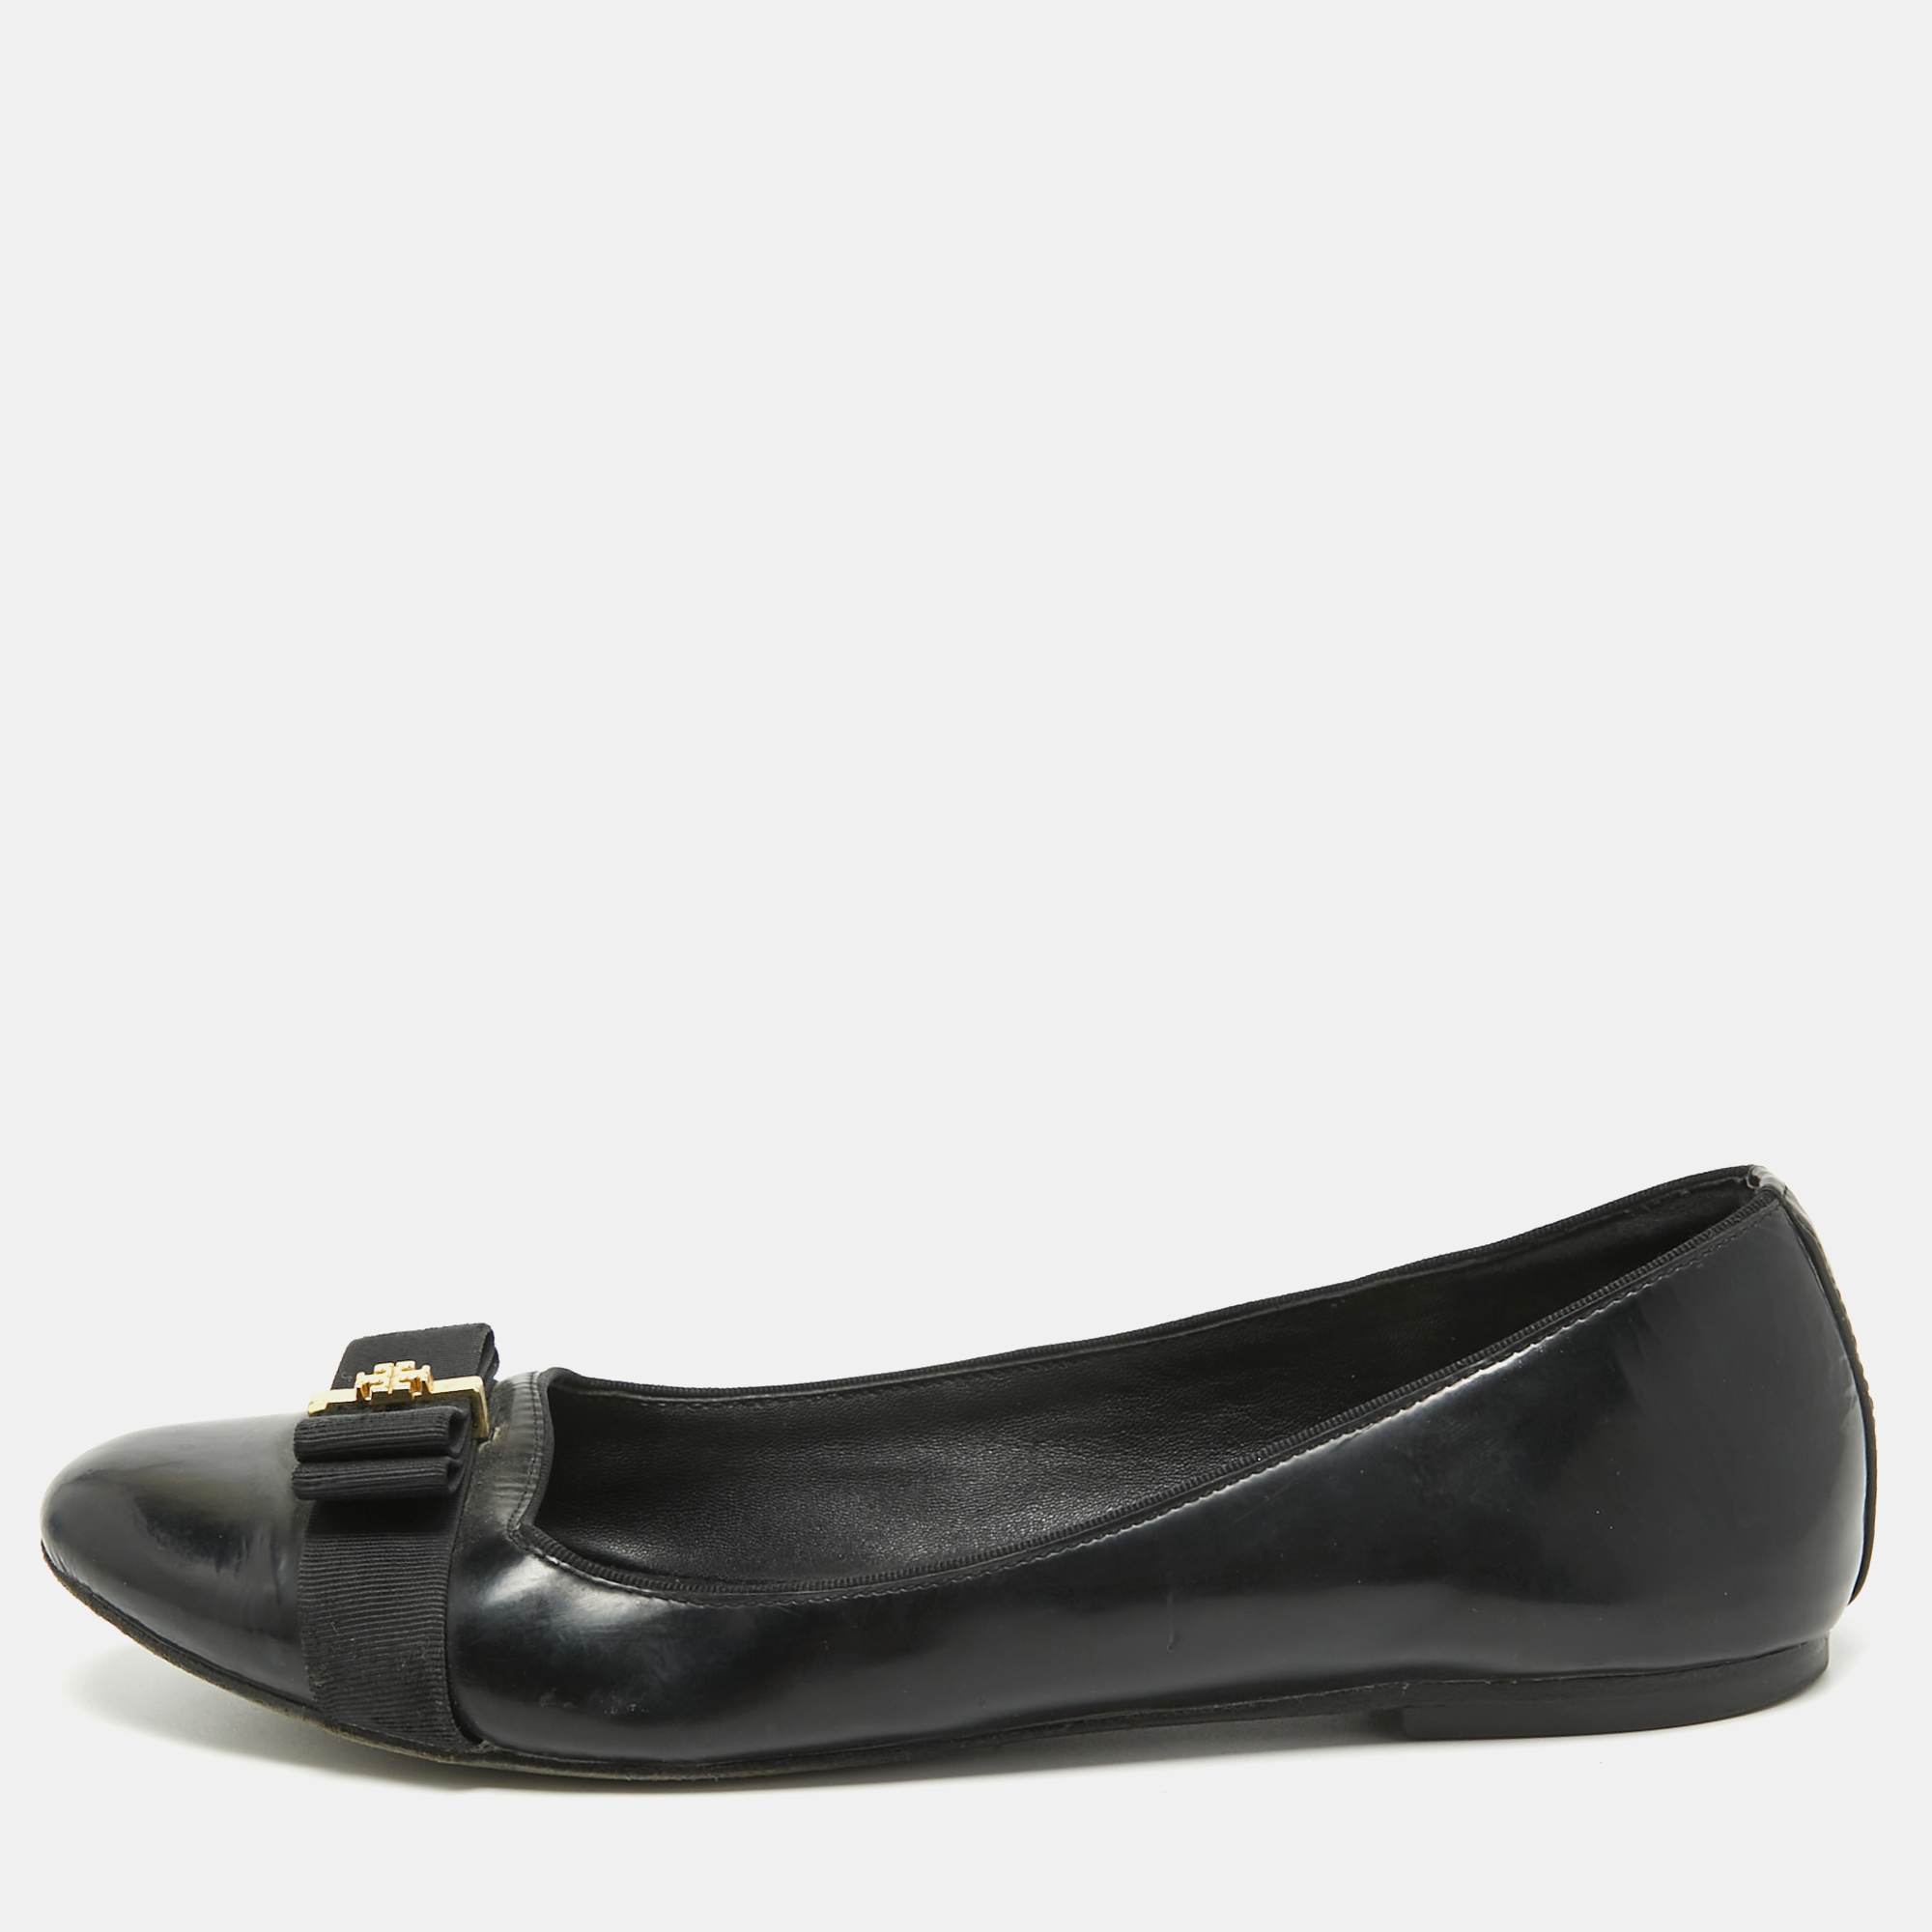 Pre-owned Tory Burch Black Patent Leather Bow Ballet Flats Size 39